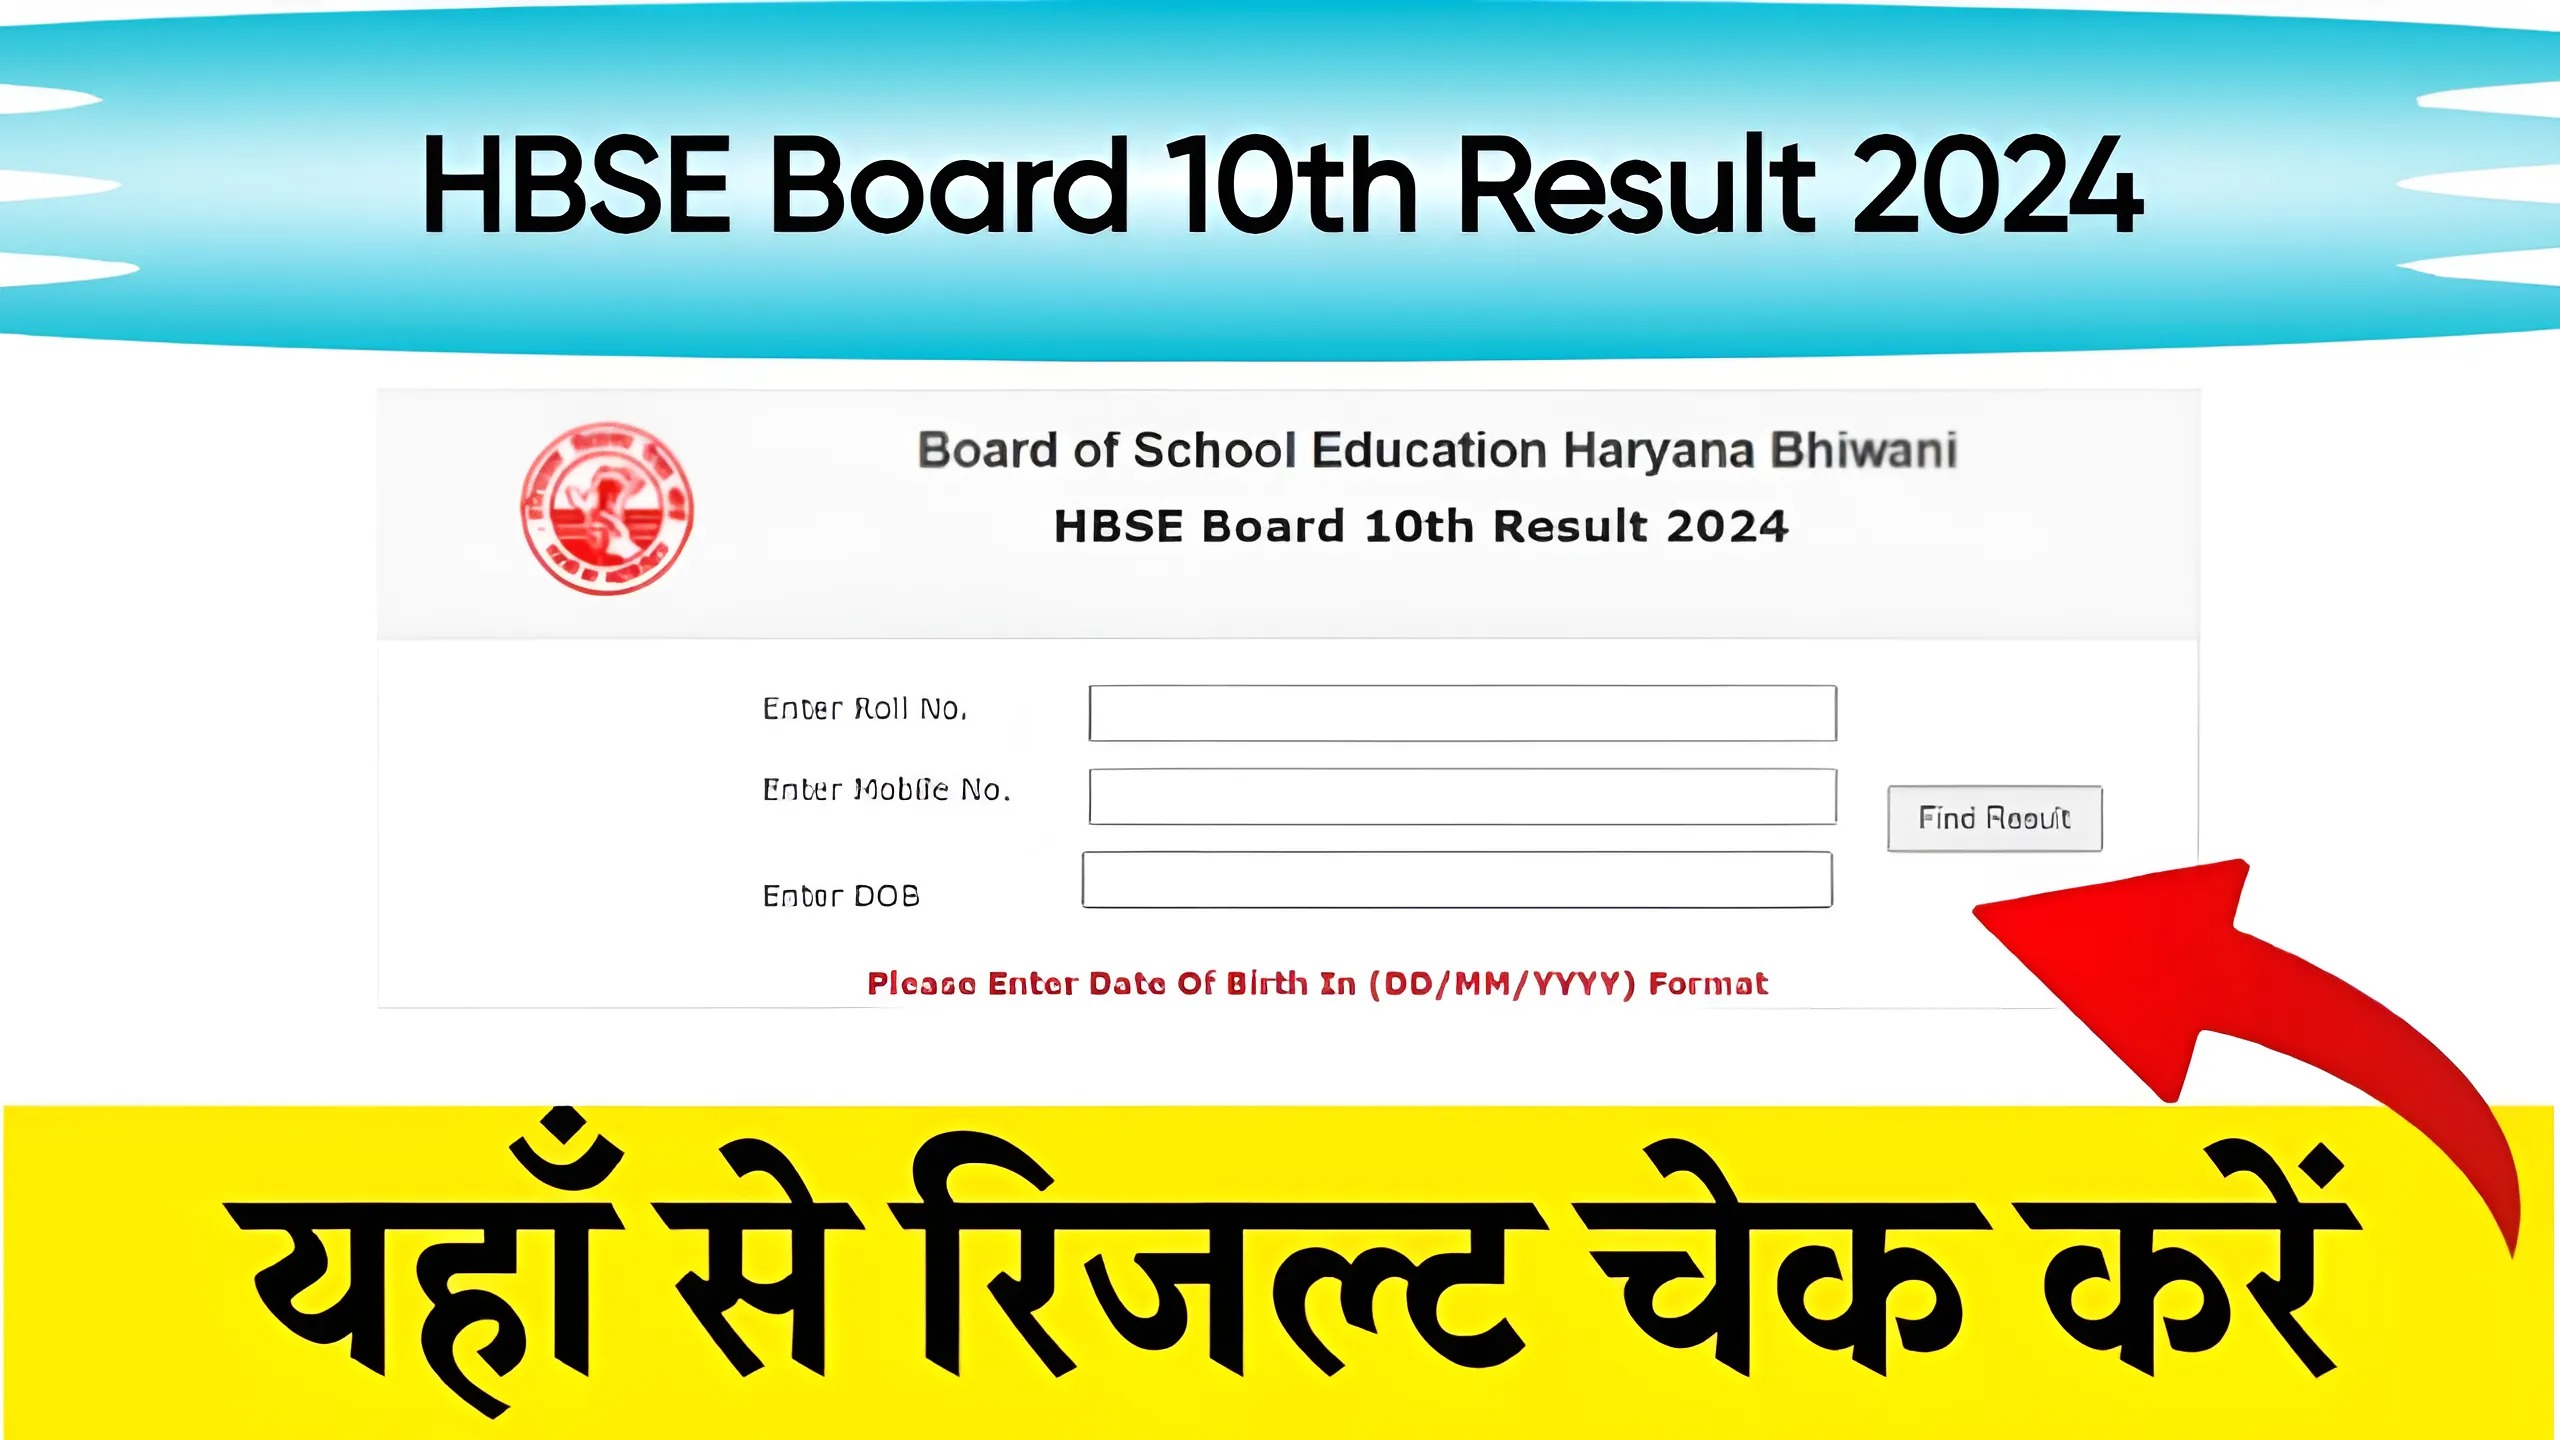 HBSE Board 10th Result 2024